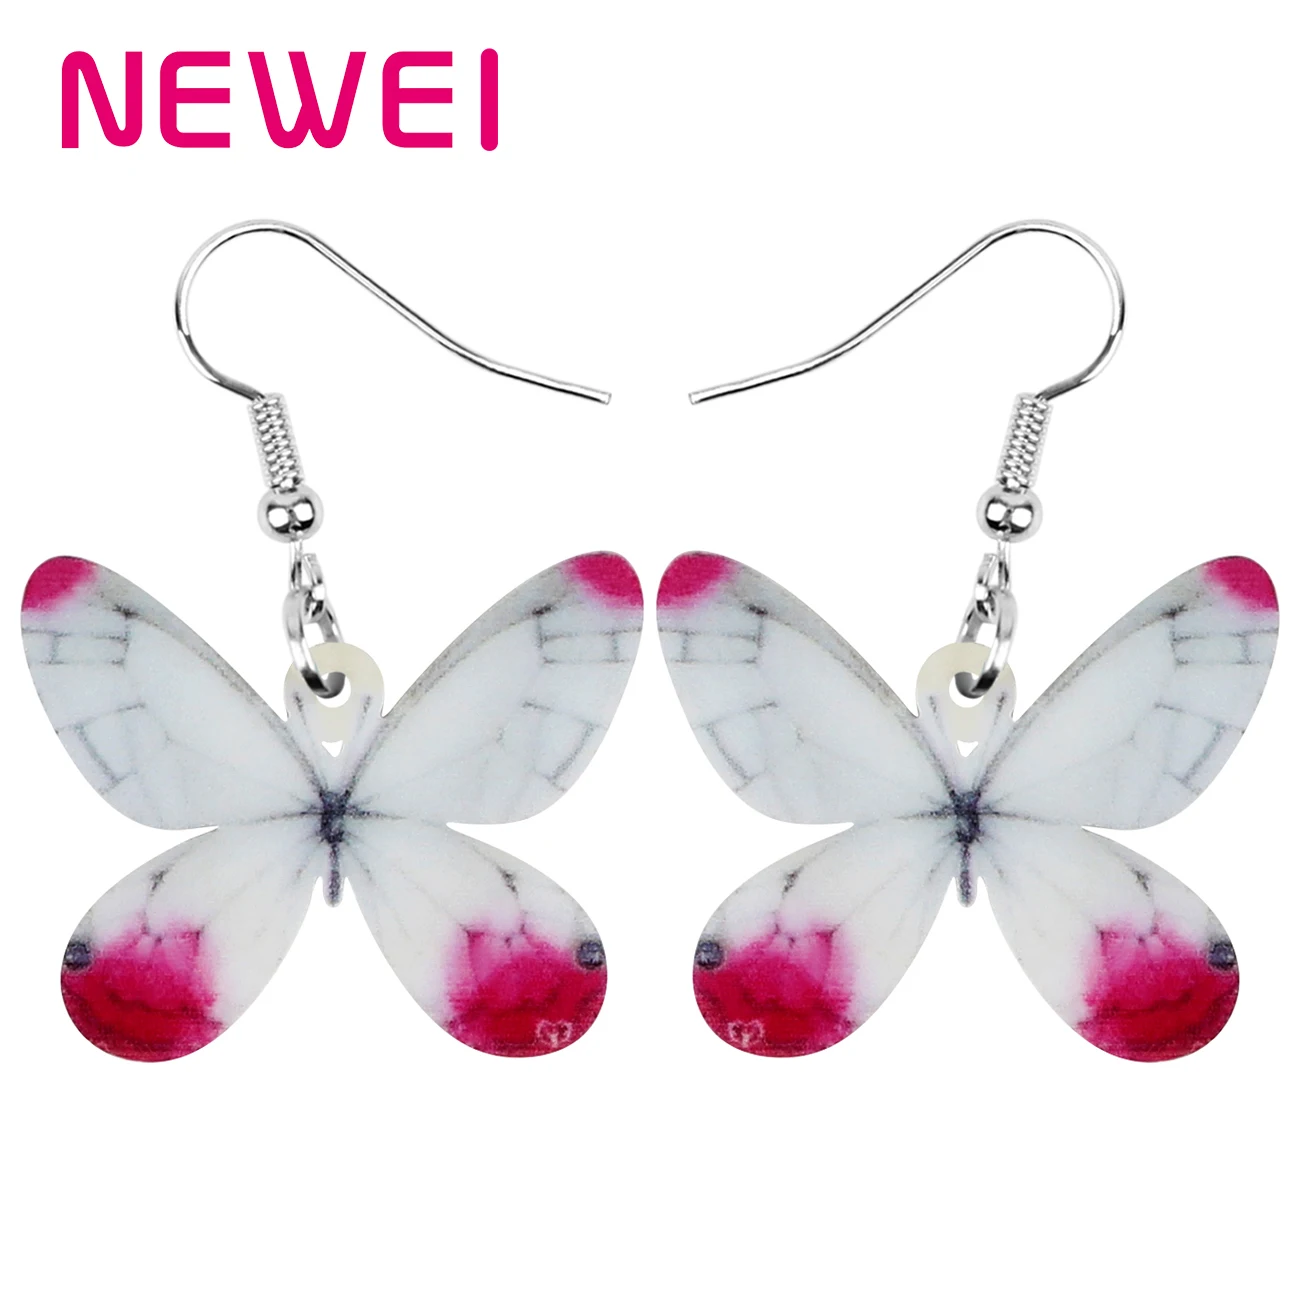 

Acrylic Lovely White Butterfly Earrings Dangle Drop Insects Fashion Charms Jewelry For Women Girls Teens Kids Trendy Gifts